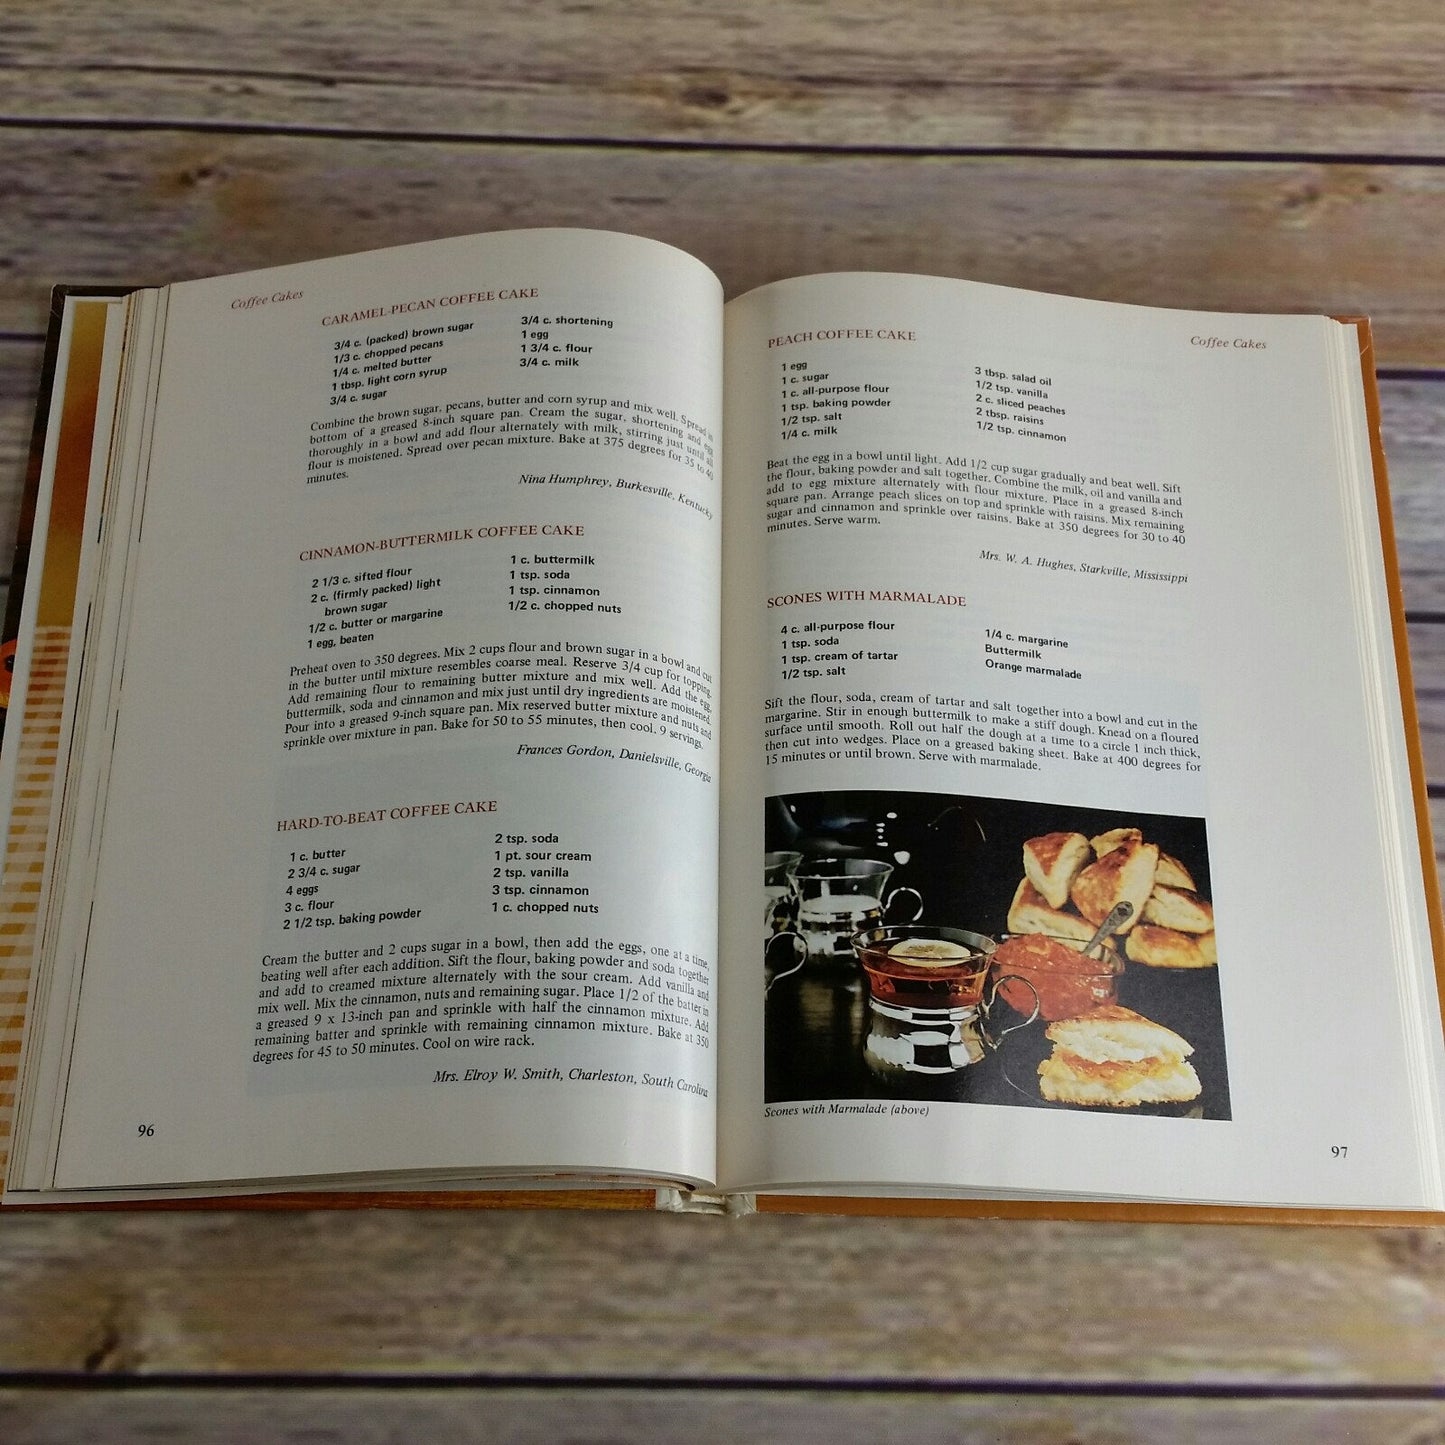 Vintage Cook  Book Breads Cookbook Recipes 1977 Southern Living Hardcover Yeast Breads Quick Breads Shortcut Breads with Mixes